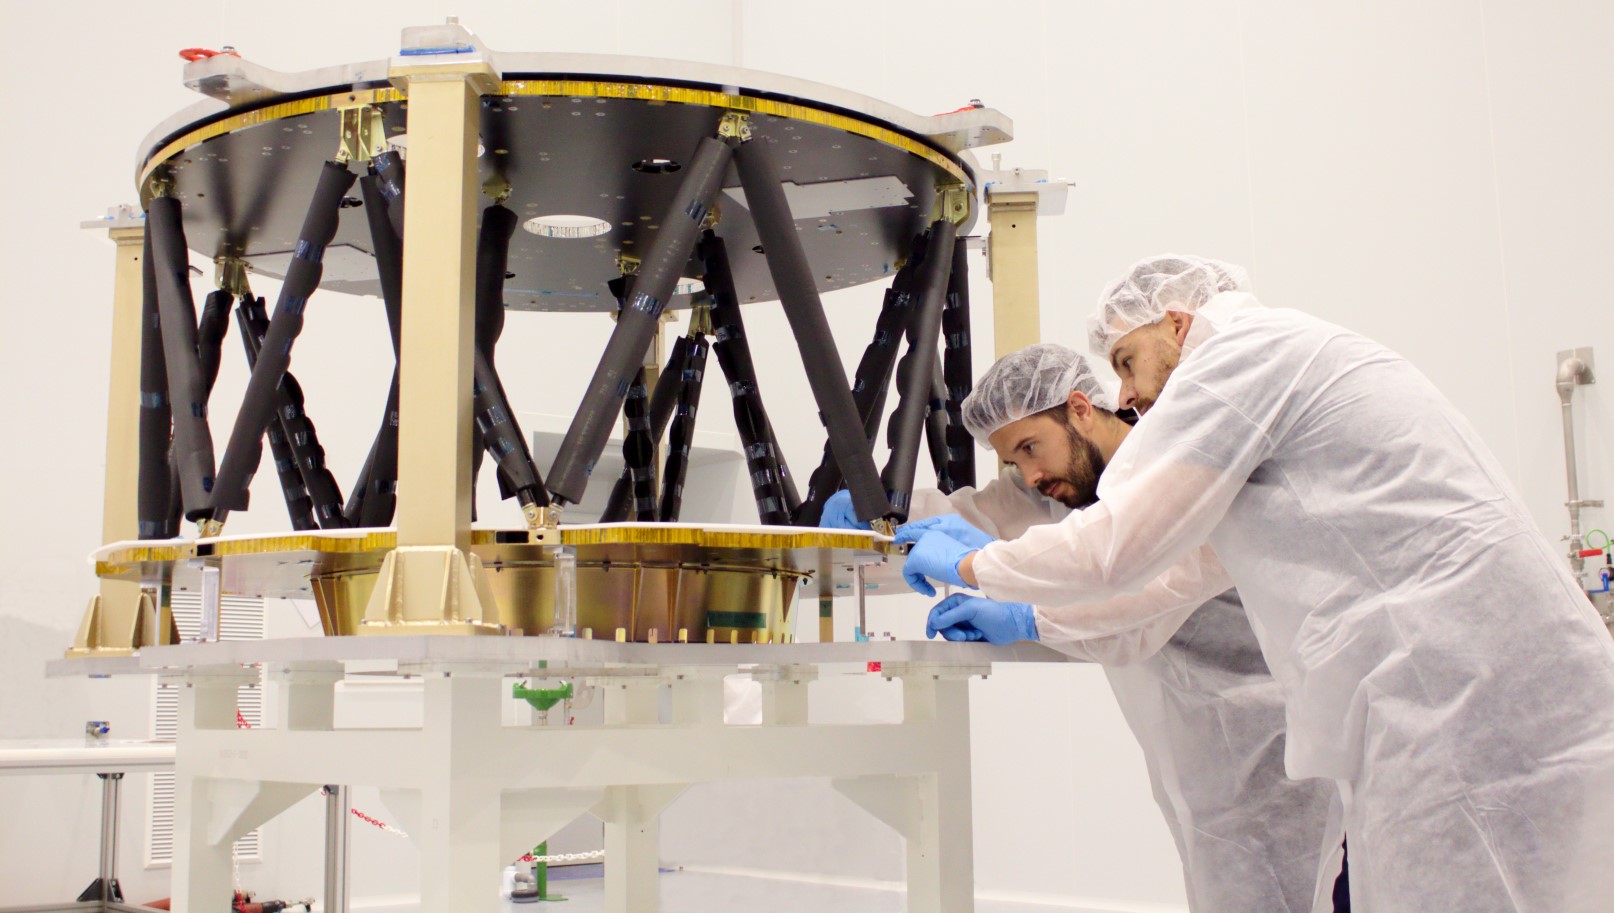 IberEspacio staff working on the SpaceIL primary structure. Photo: courtesy